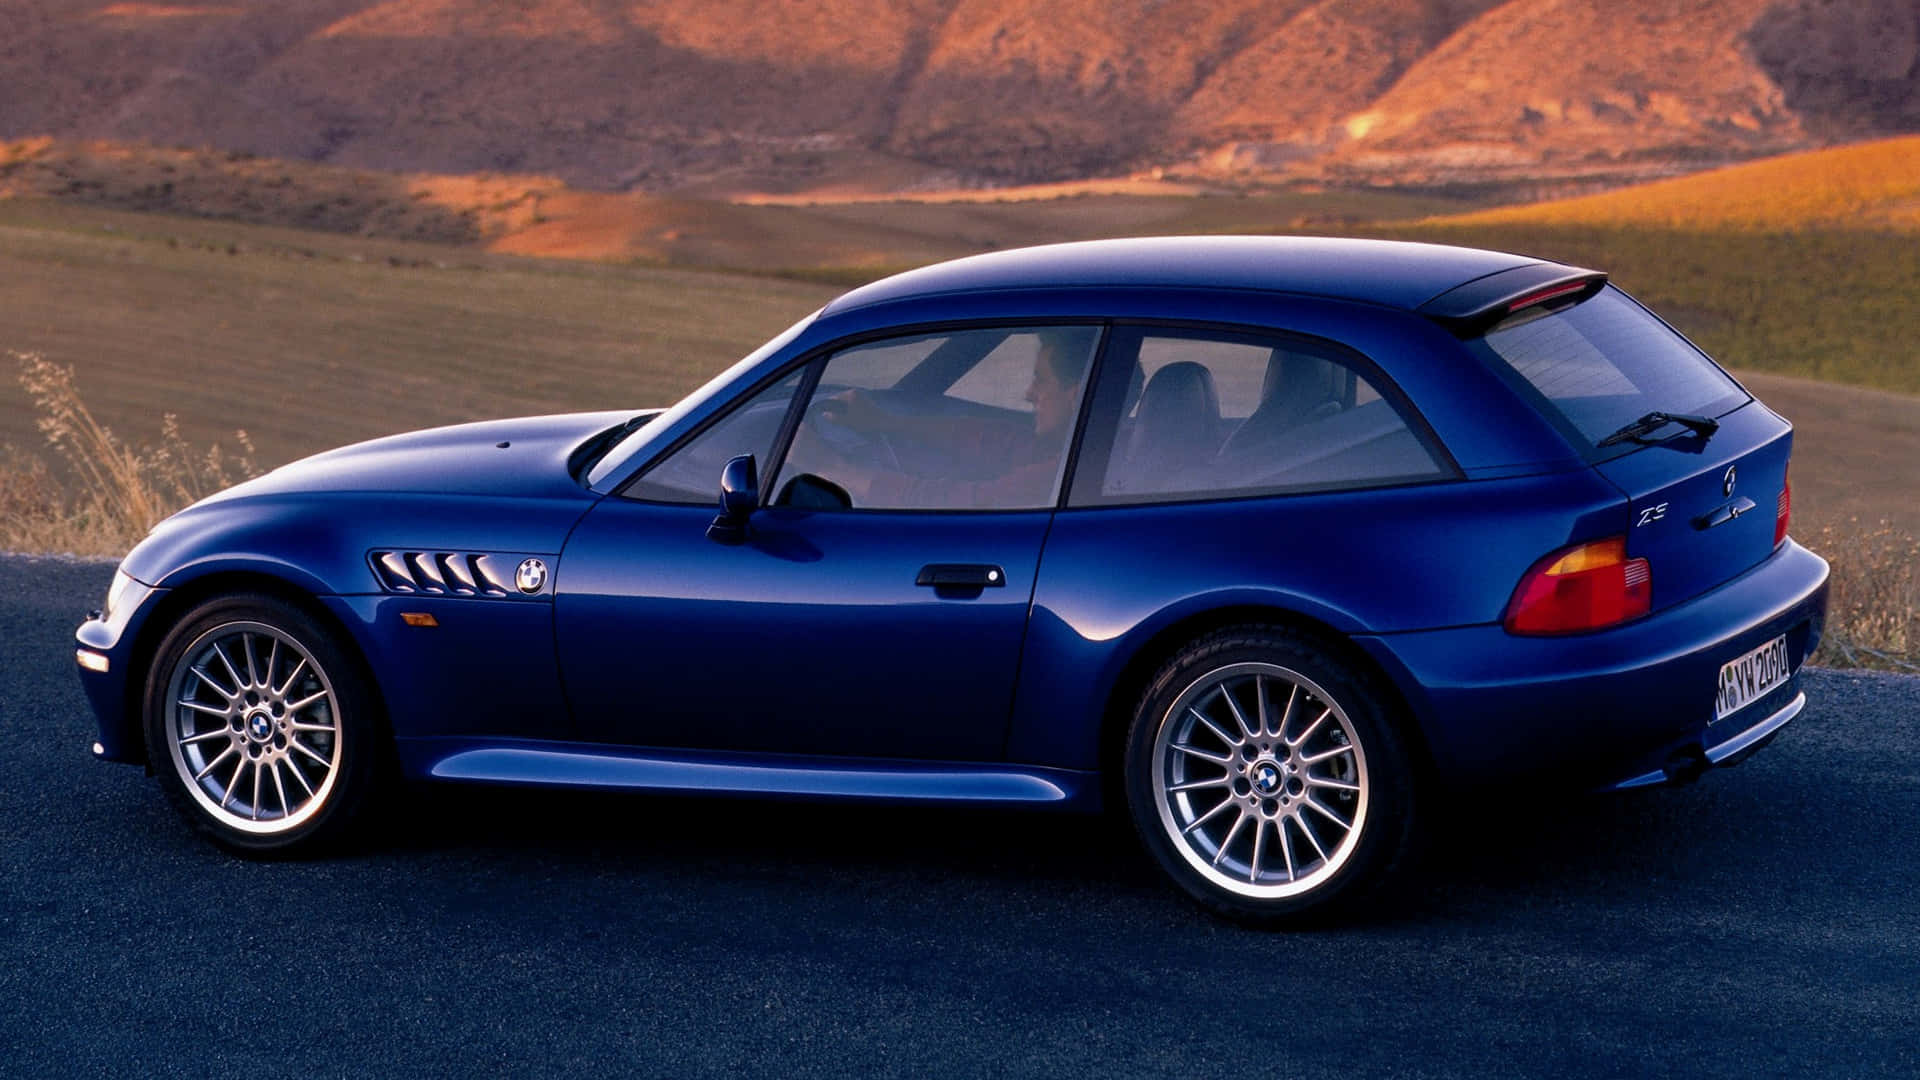 Sleek and Stylish BMW Z3 Roadster in High Definition Wallpaper